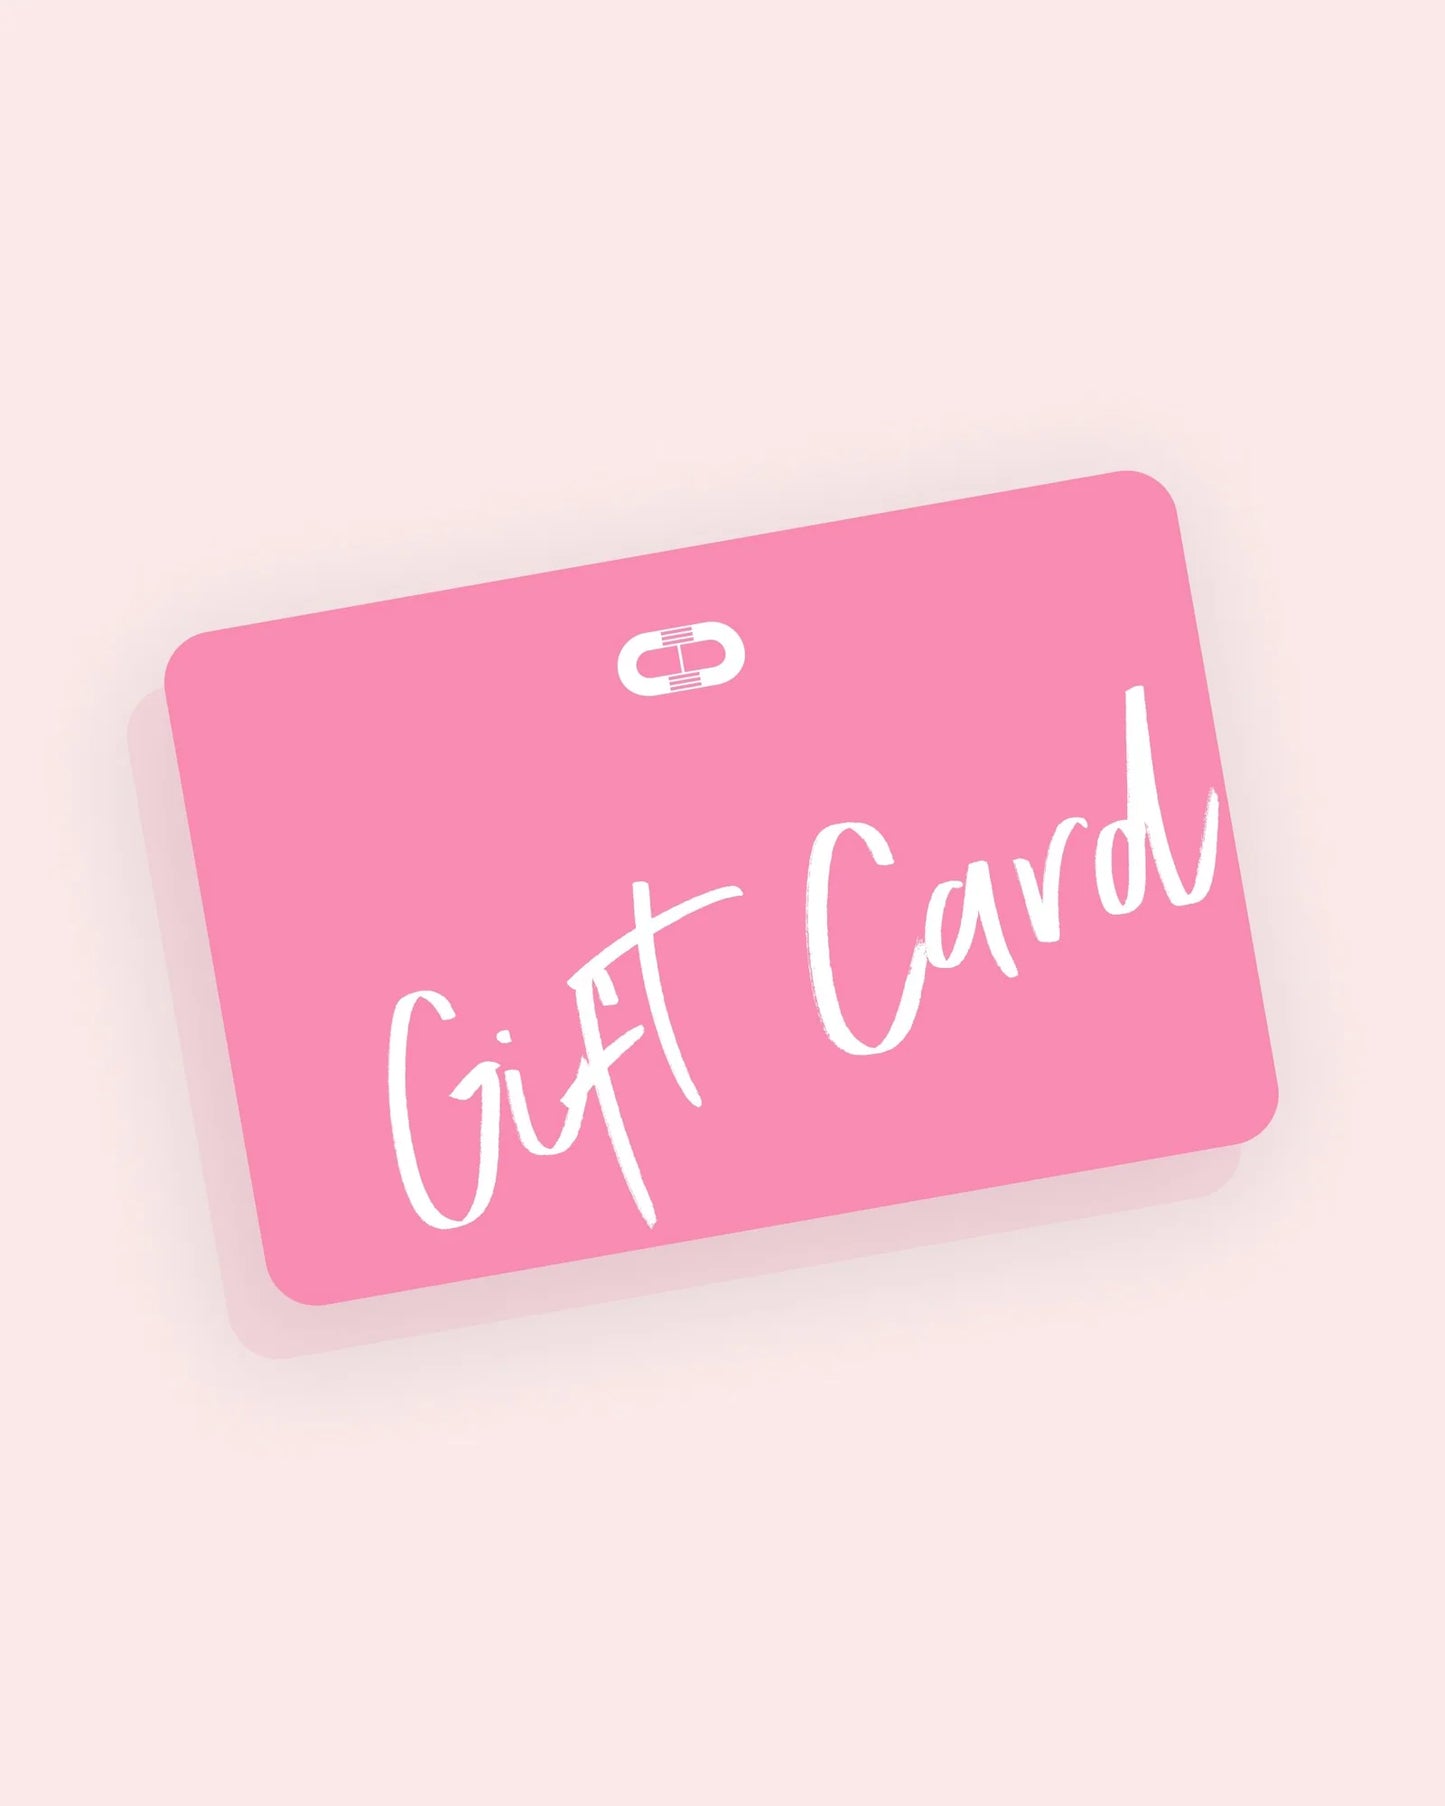 Lifestyle Online Gift Card